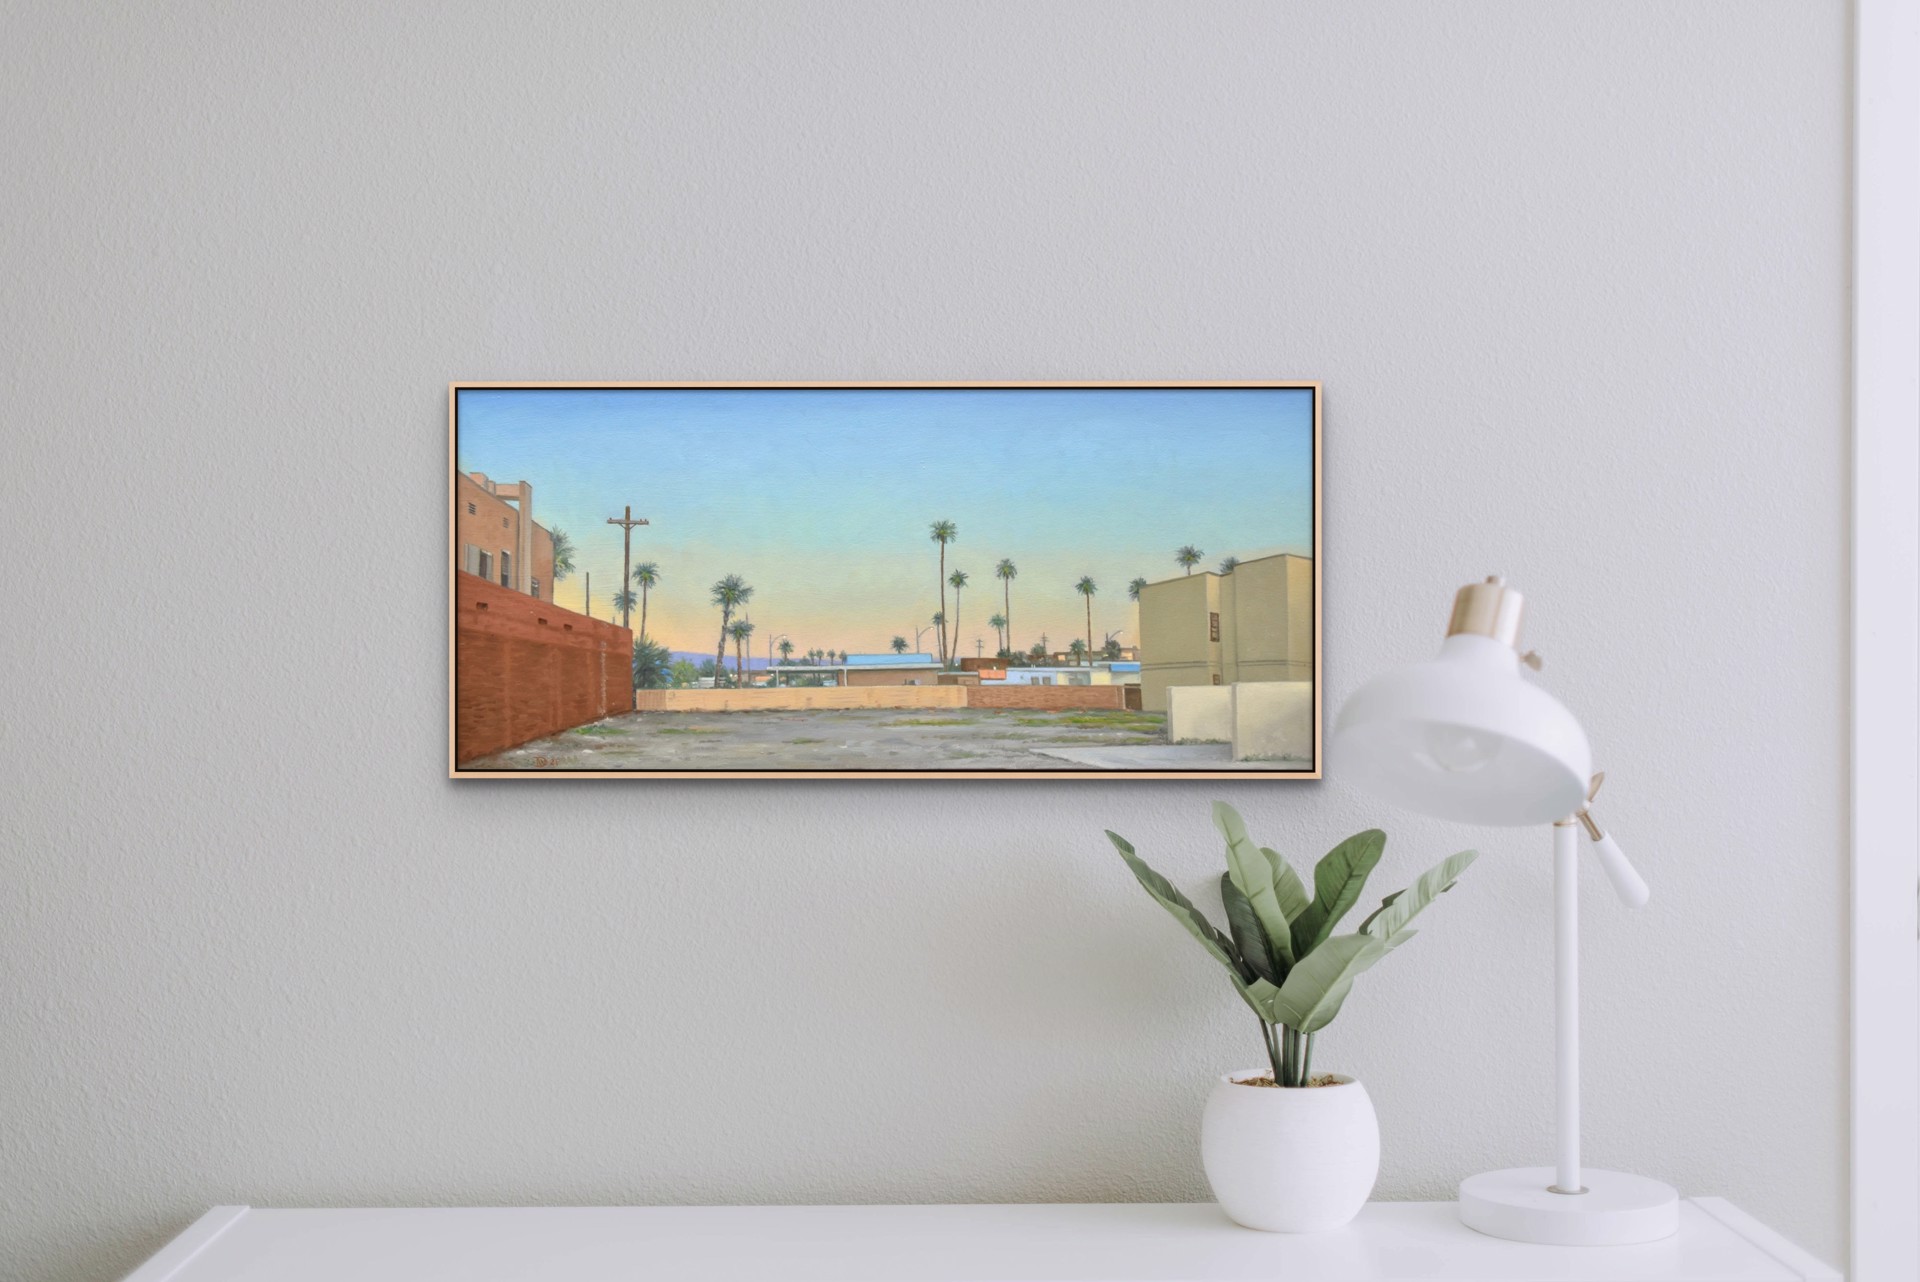 Vacant Lot, Palm Springs by Willard Dixon